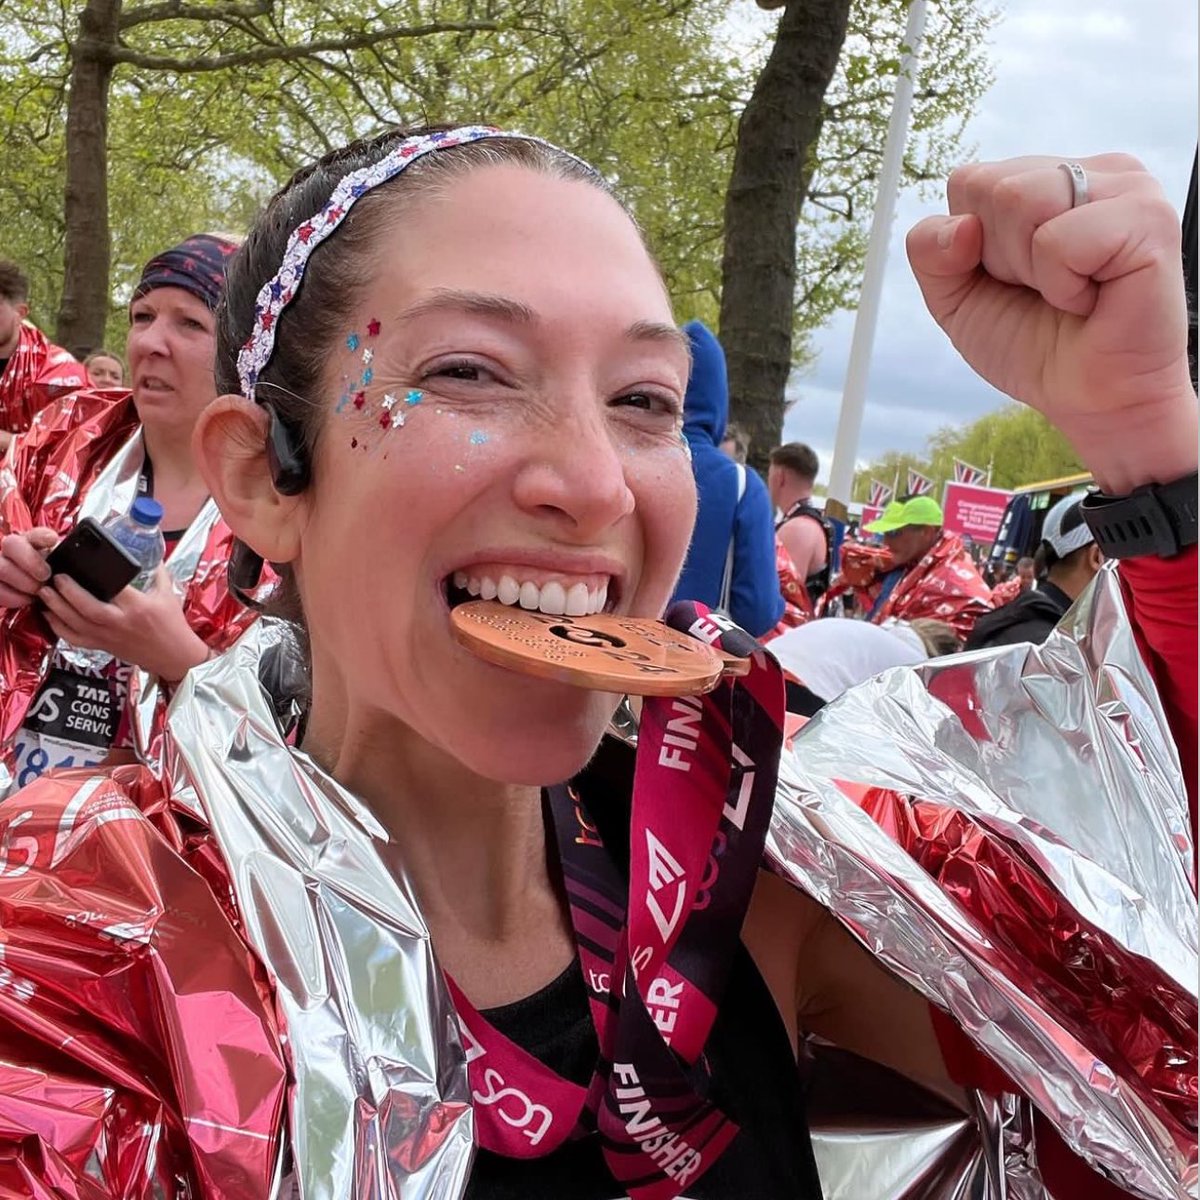 The redemption race of my dreams!!! London Marathon, thank you! You have my entire heart! 6 days and two marathons later, we got our BQ and second best marathon ever! 3:37:05 LFG!